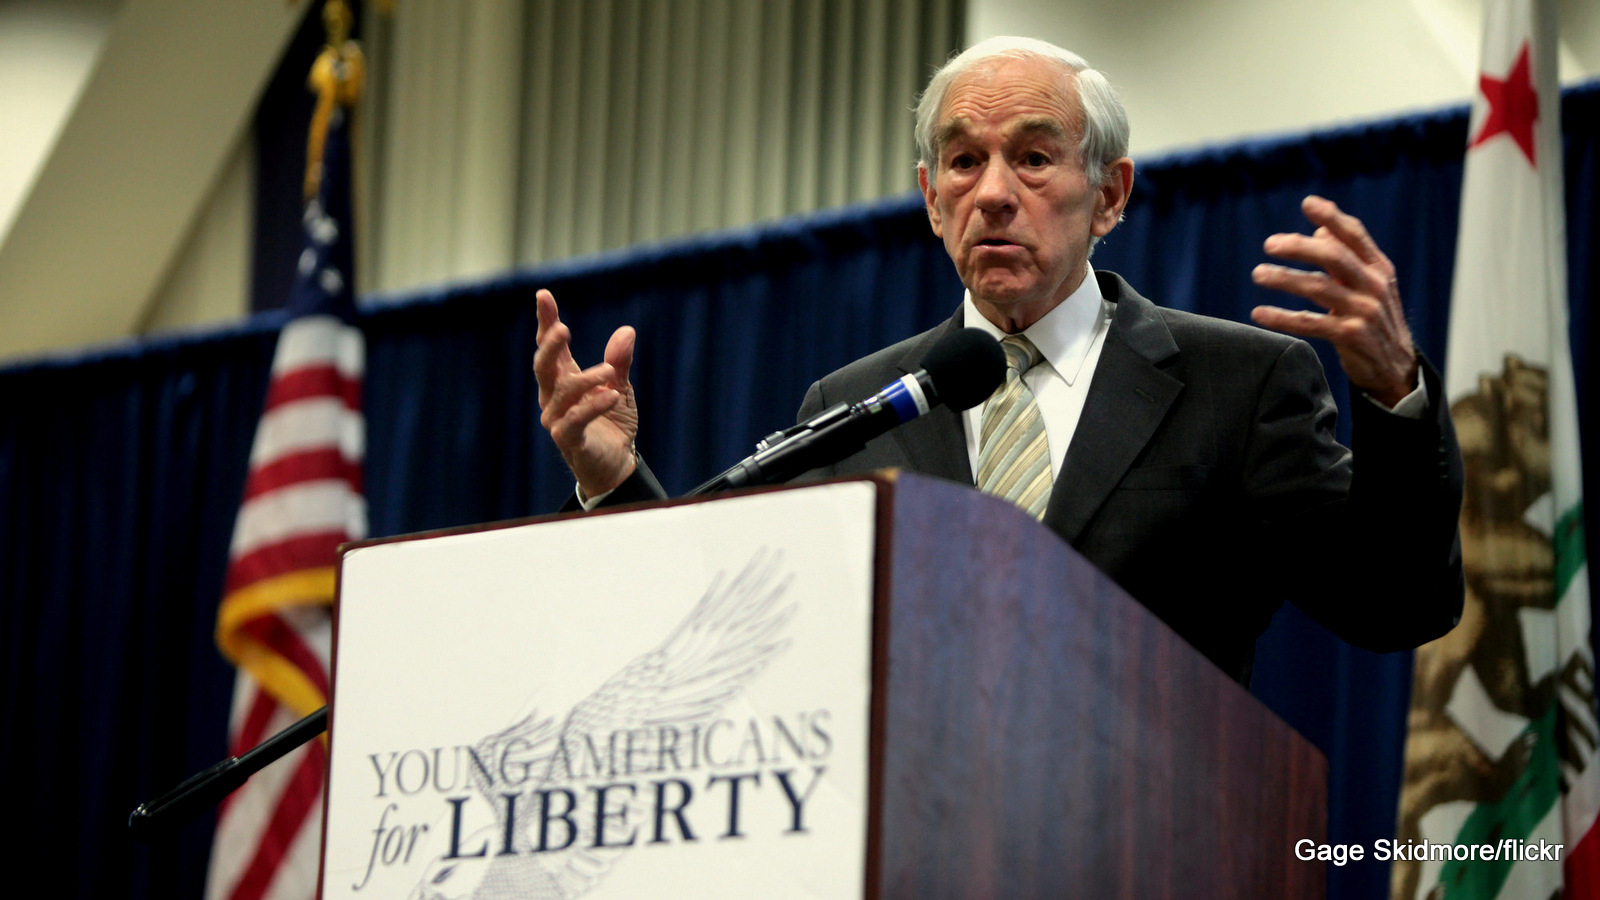 Former U.S. Congressman Ron Paul speaking with attendees at the 2016 Young Americans for Liberty California State Convention at the University of California, Irvine in Irvine, California.